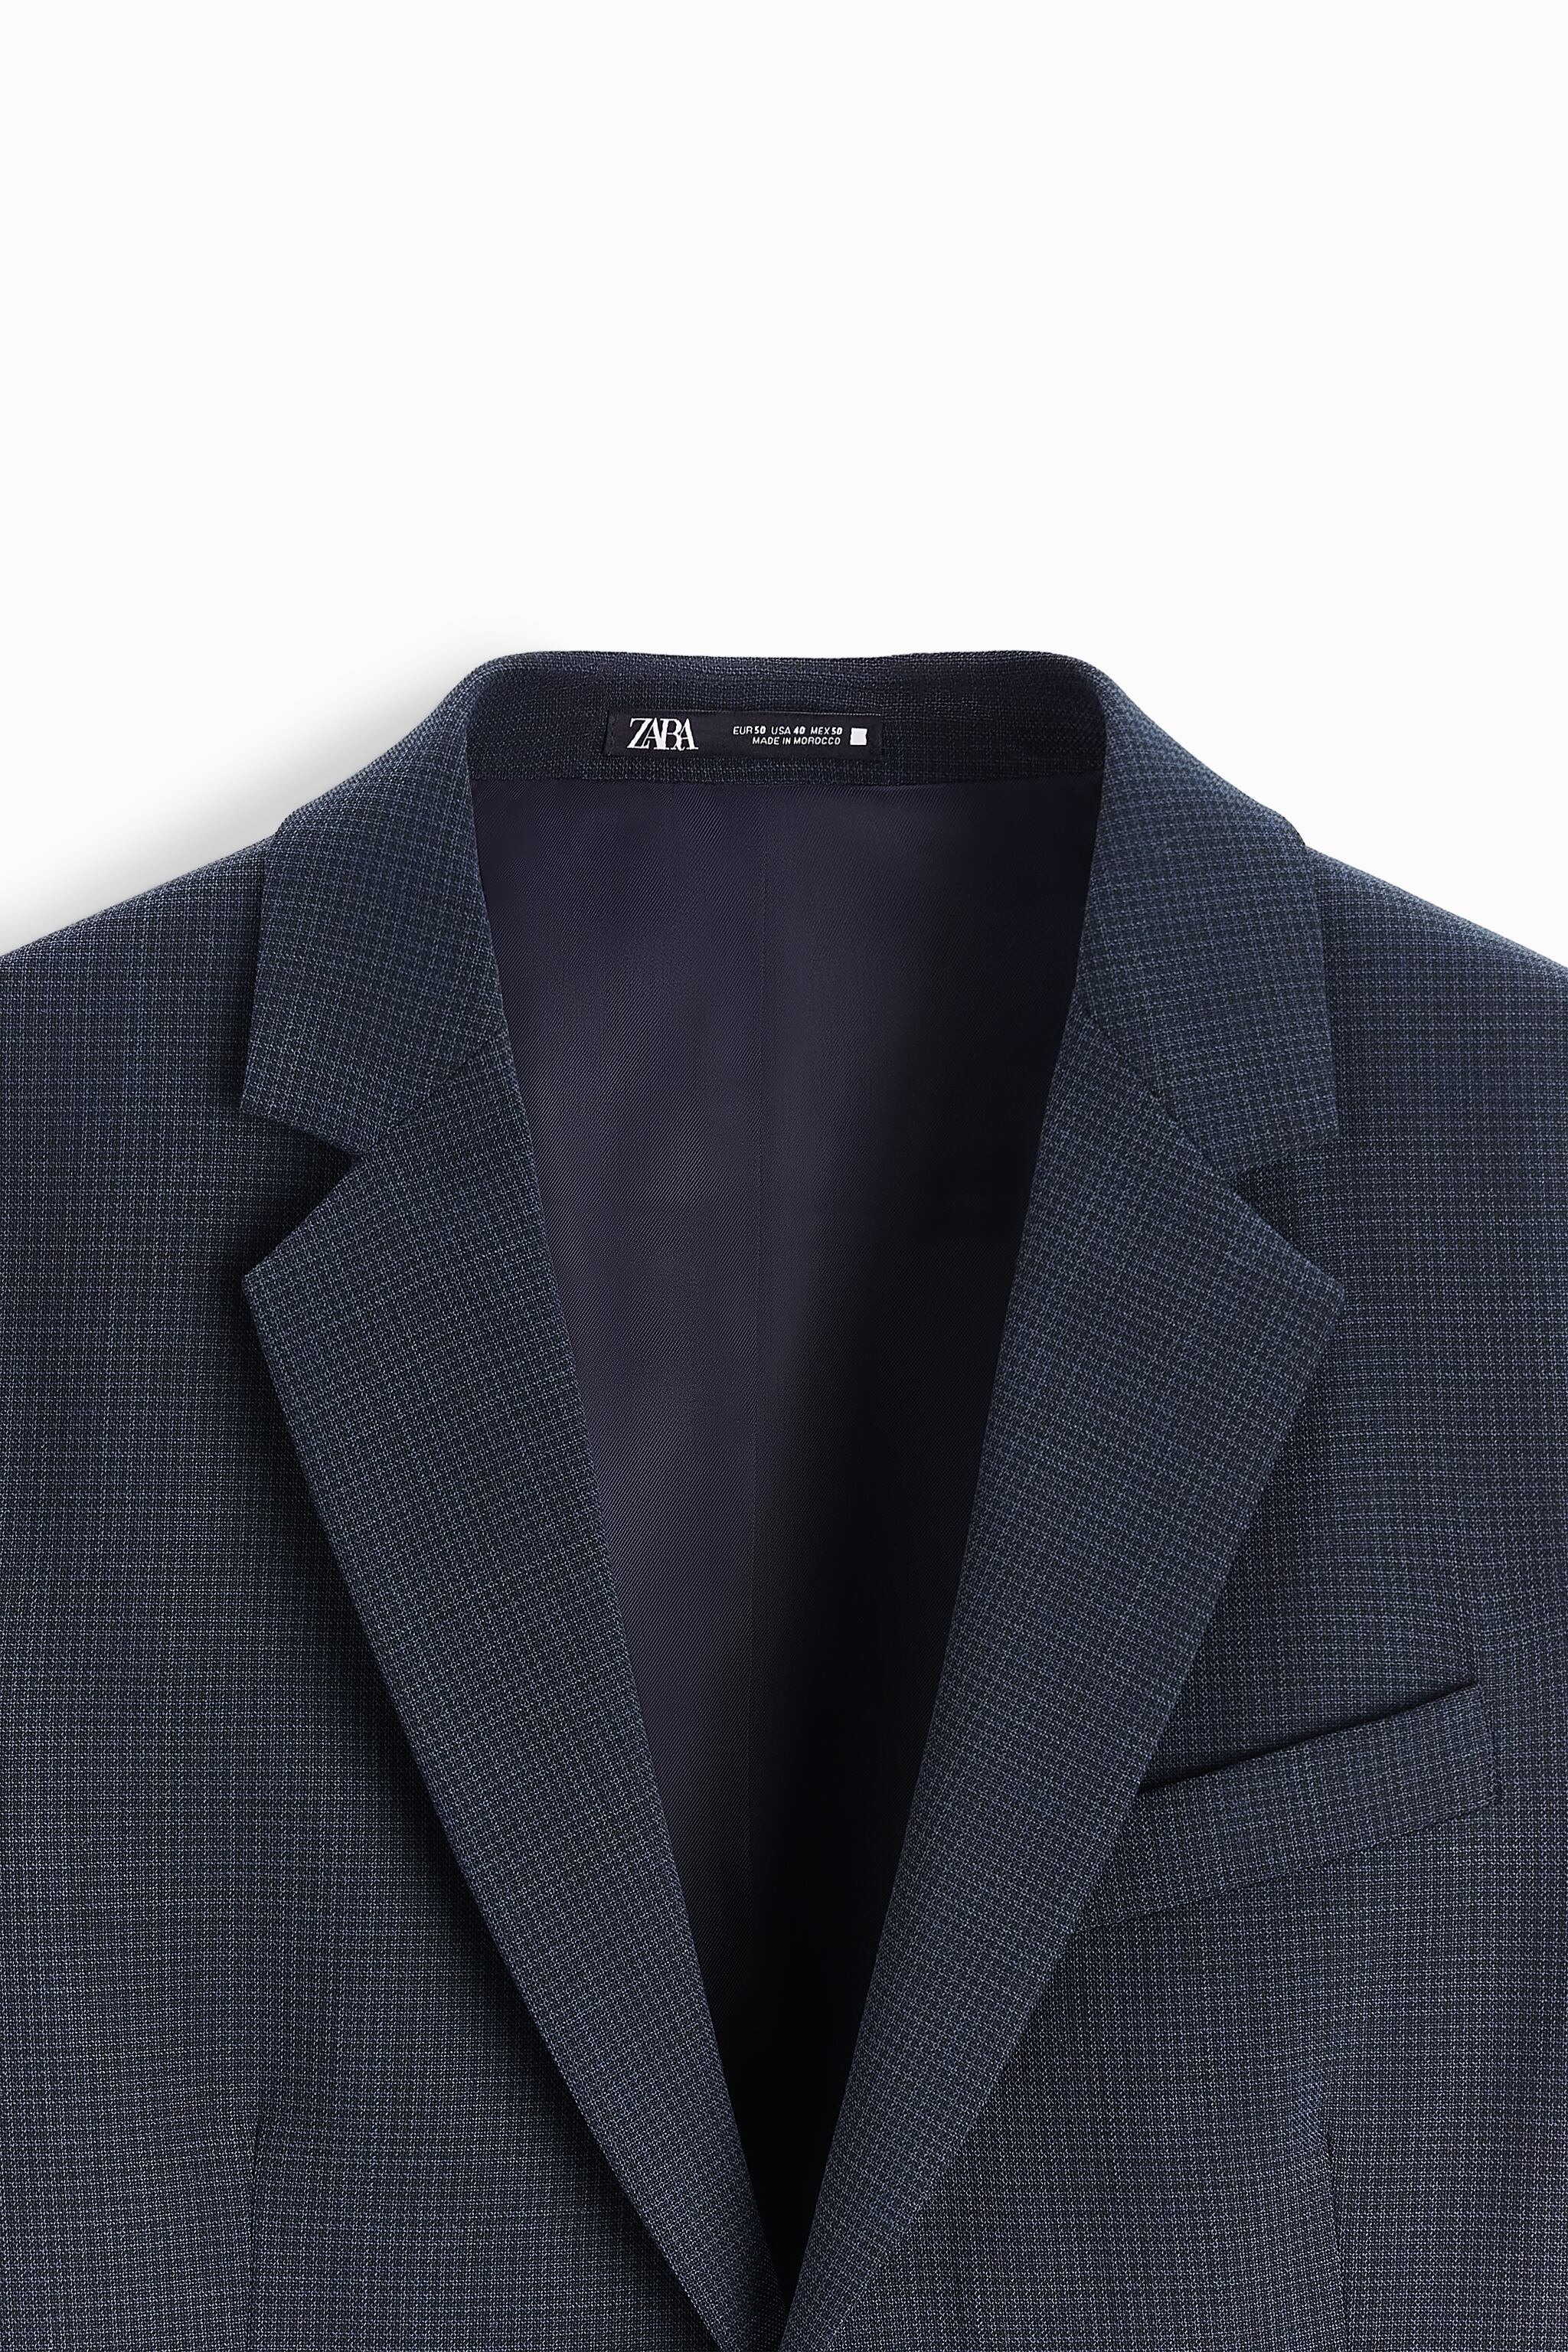 HOUNDSTOOTH SUIT JACKET